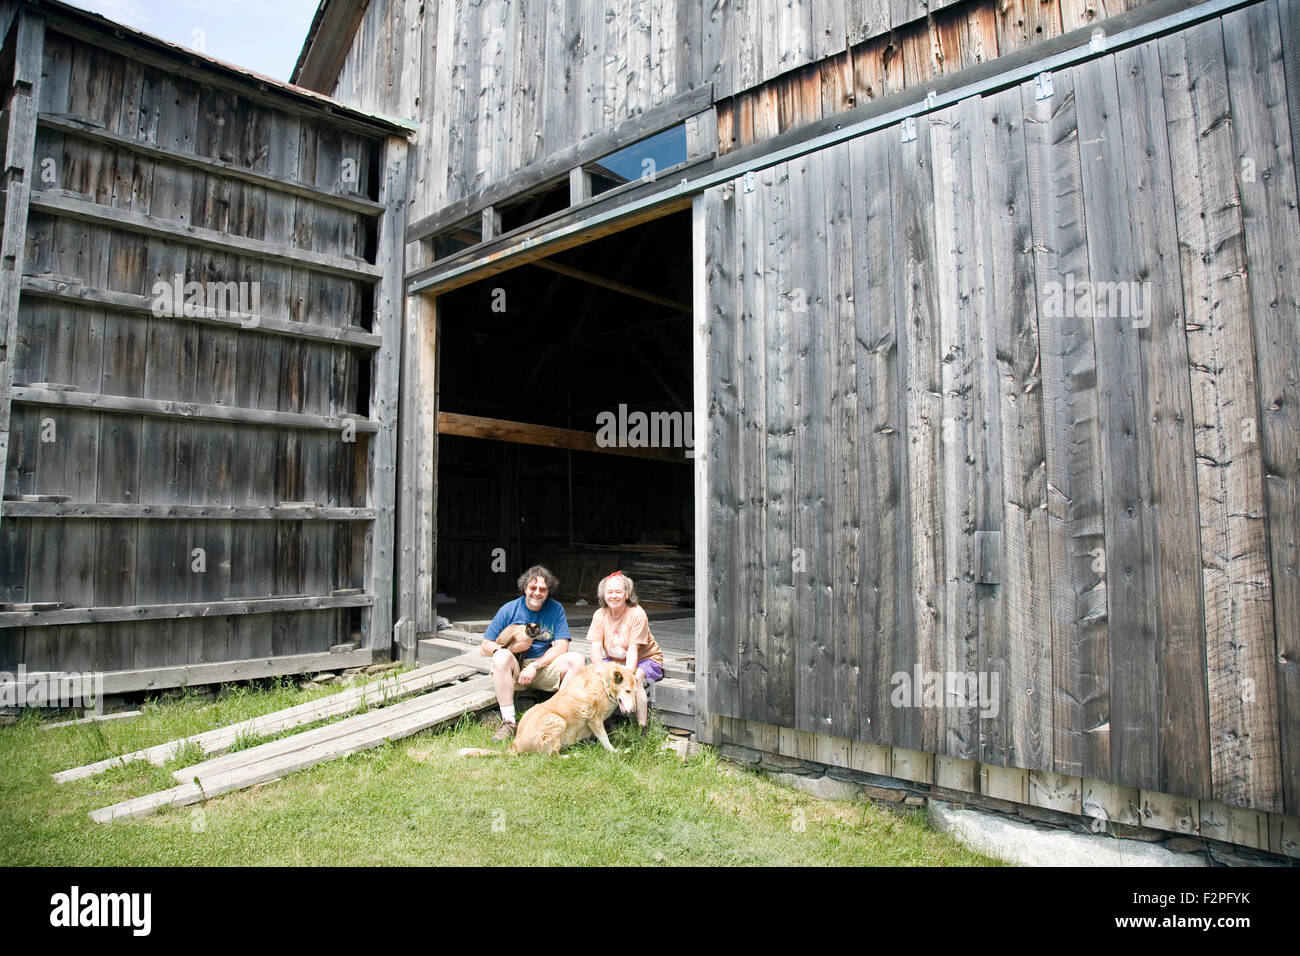 The Triano family, including dog, Stannard, Vermont Stock Photo